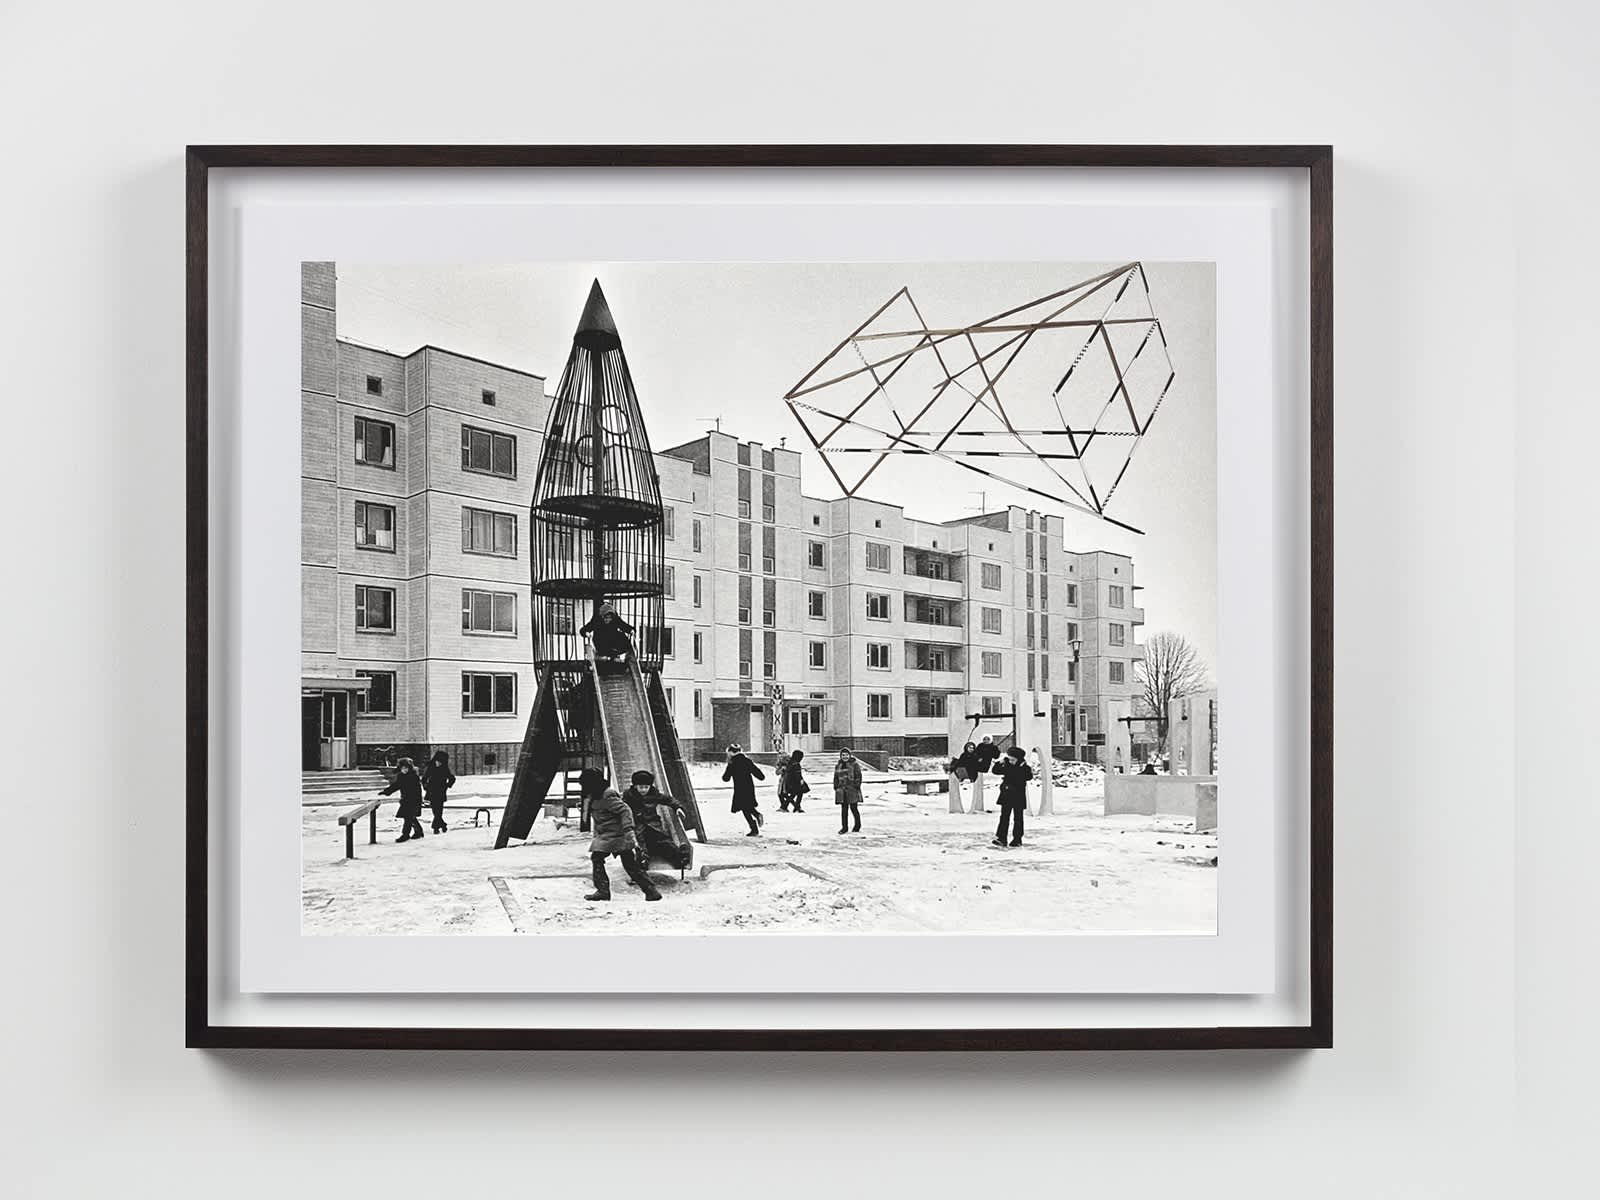 Jane and Louise Wilson, Imperial Measure 16 (Atomgrad, Ukraine), 2014, photo print and collage on Hahnemühle paper, 45.4 × 59.9 cm